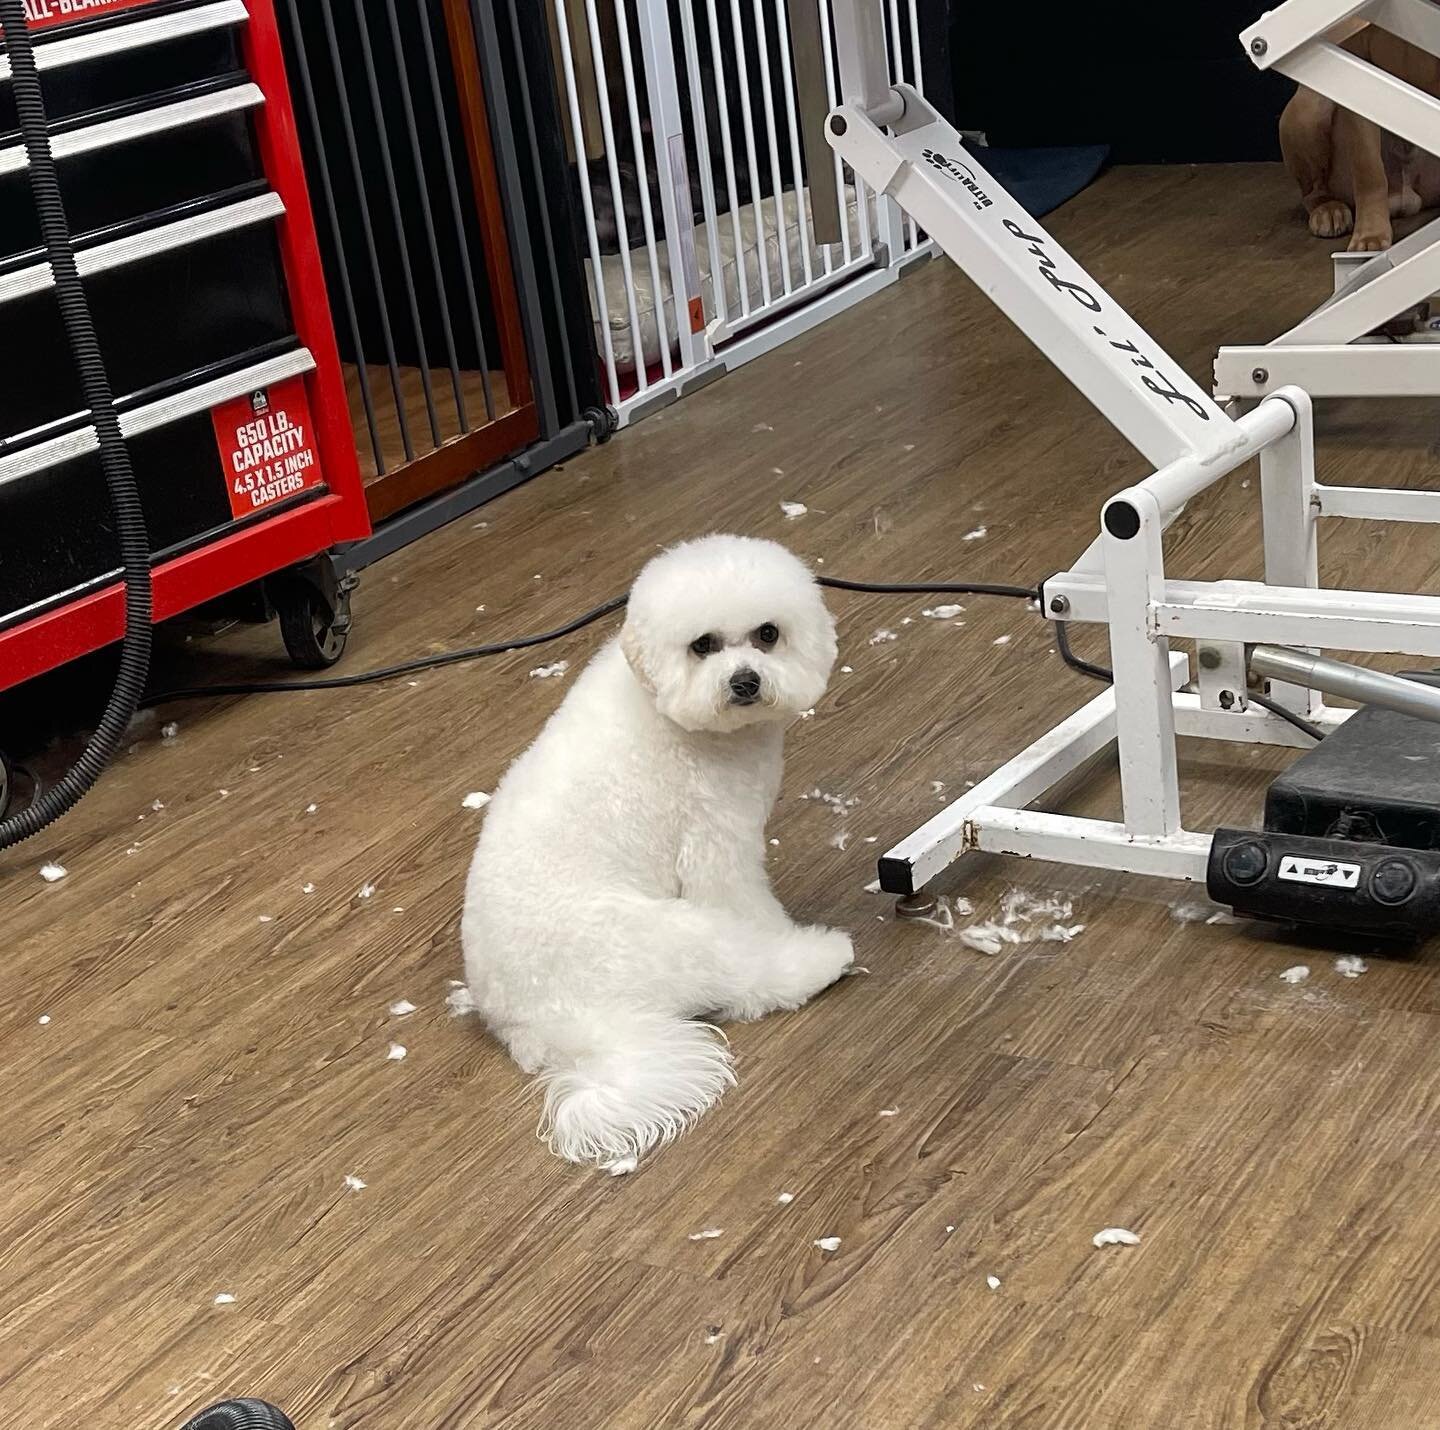 Babette waiting patiently for me to return from the back ❤️❤️❤️ #fabfurbtown #bichonpuppy #bichonfrise #petgrooming #petgroomingsalon #bloomingtonindianapetgroomers